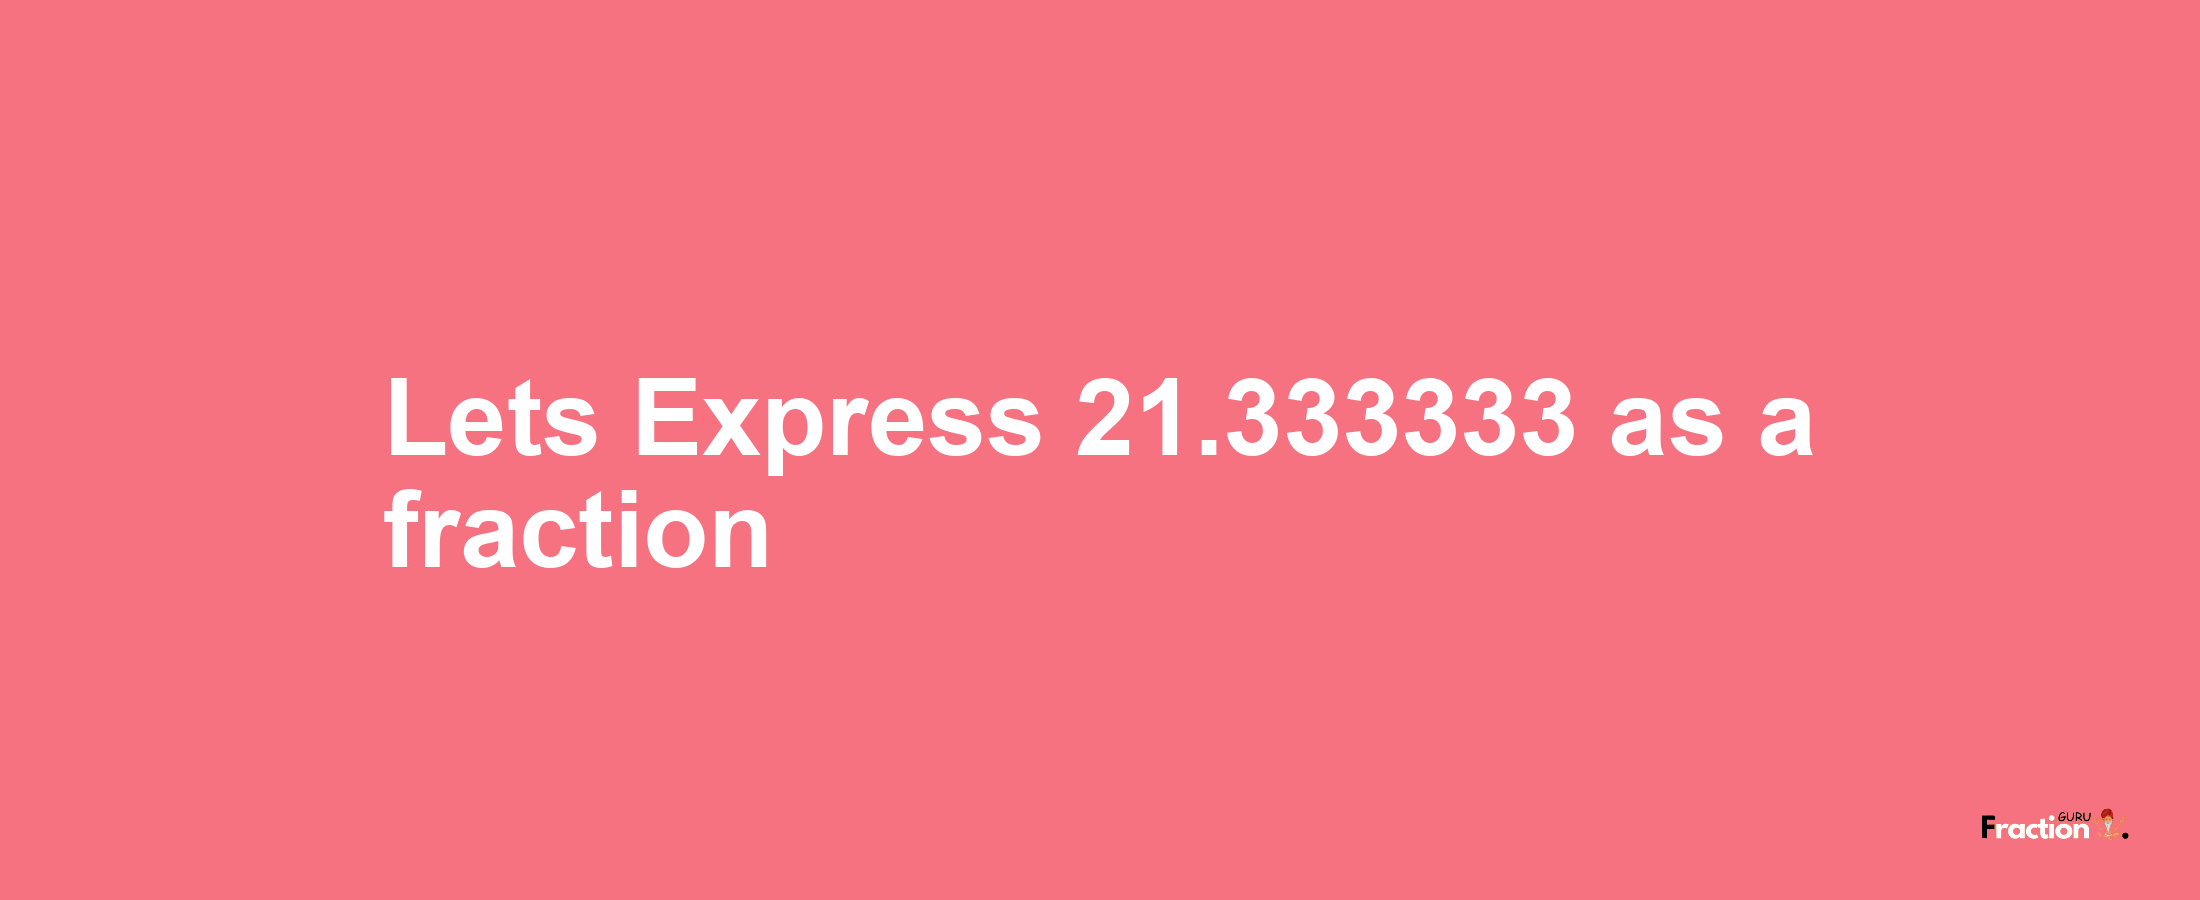 Lets Express 21.333333 as afraction